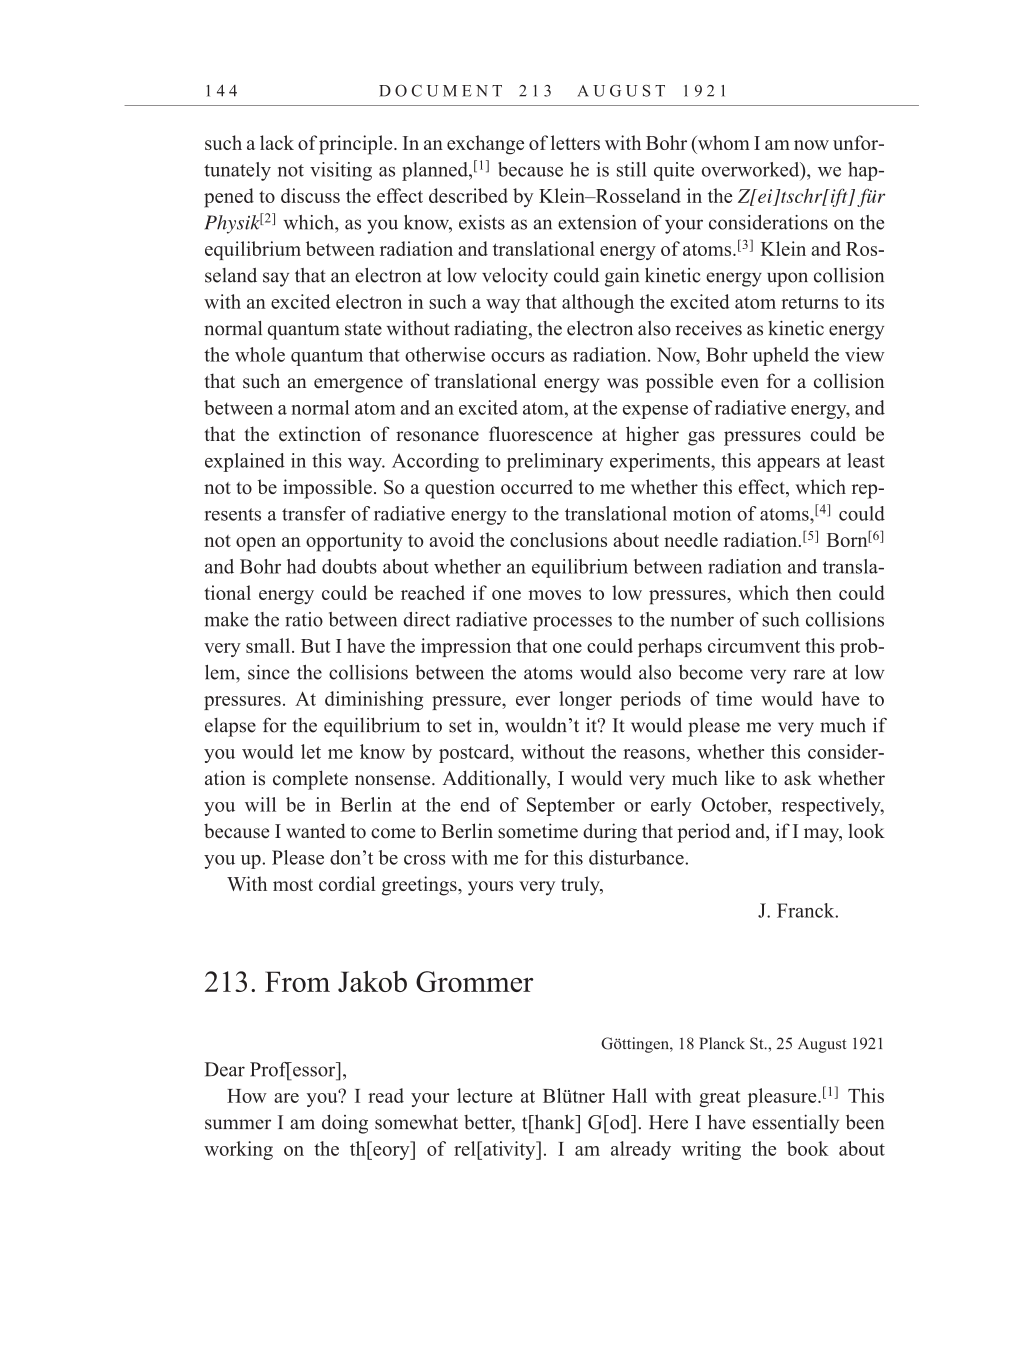 Volume 12: The Berlin Years: Correspondence, January-December 1921 (English translation supplement) page 144